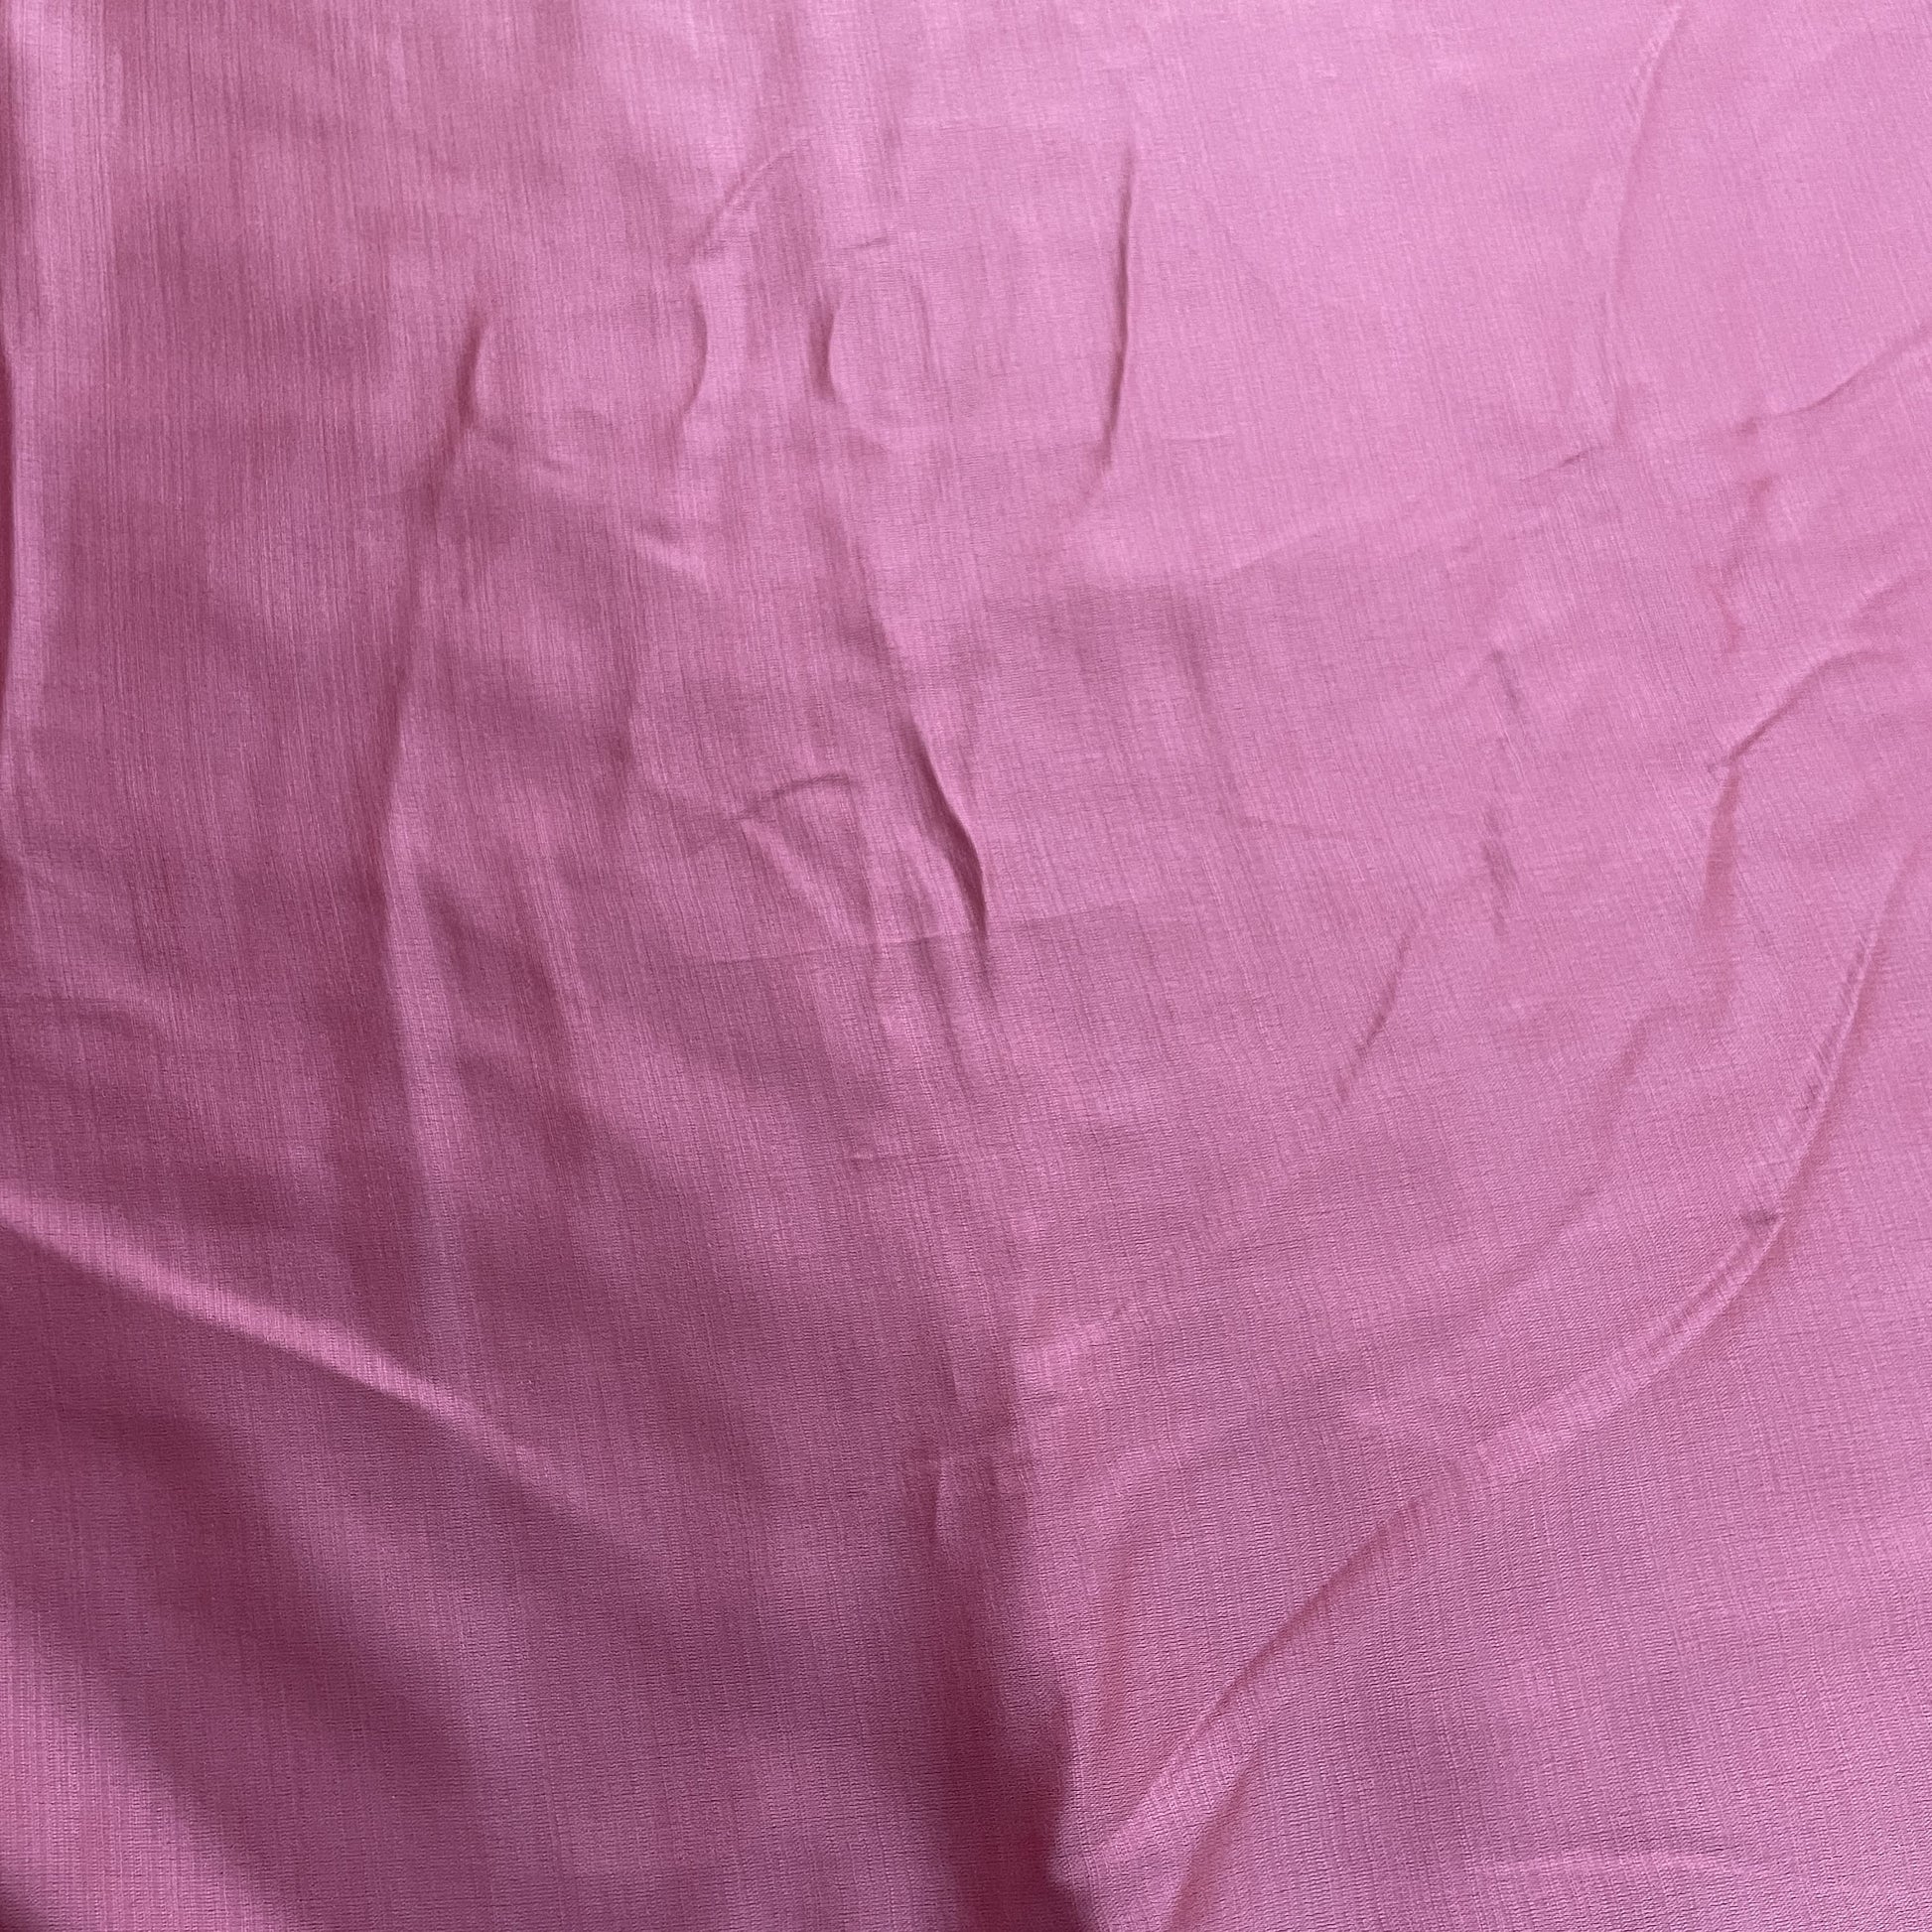 Classic Pink Solid Bemberg Silk